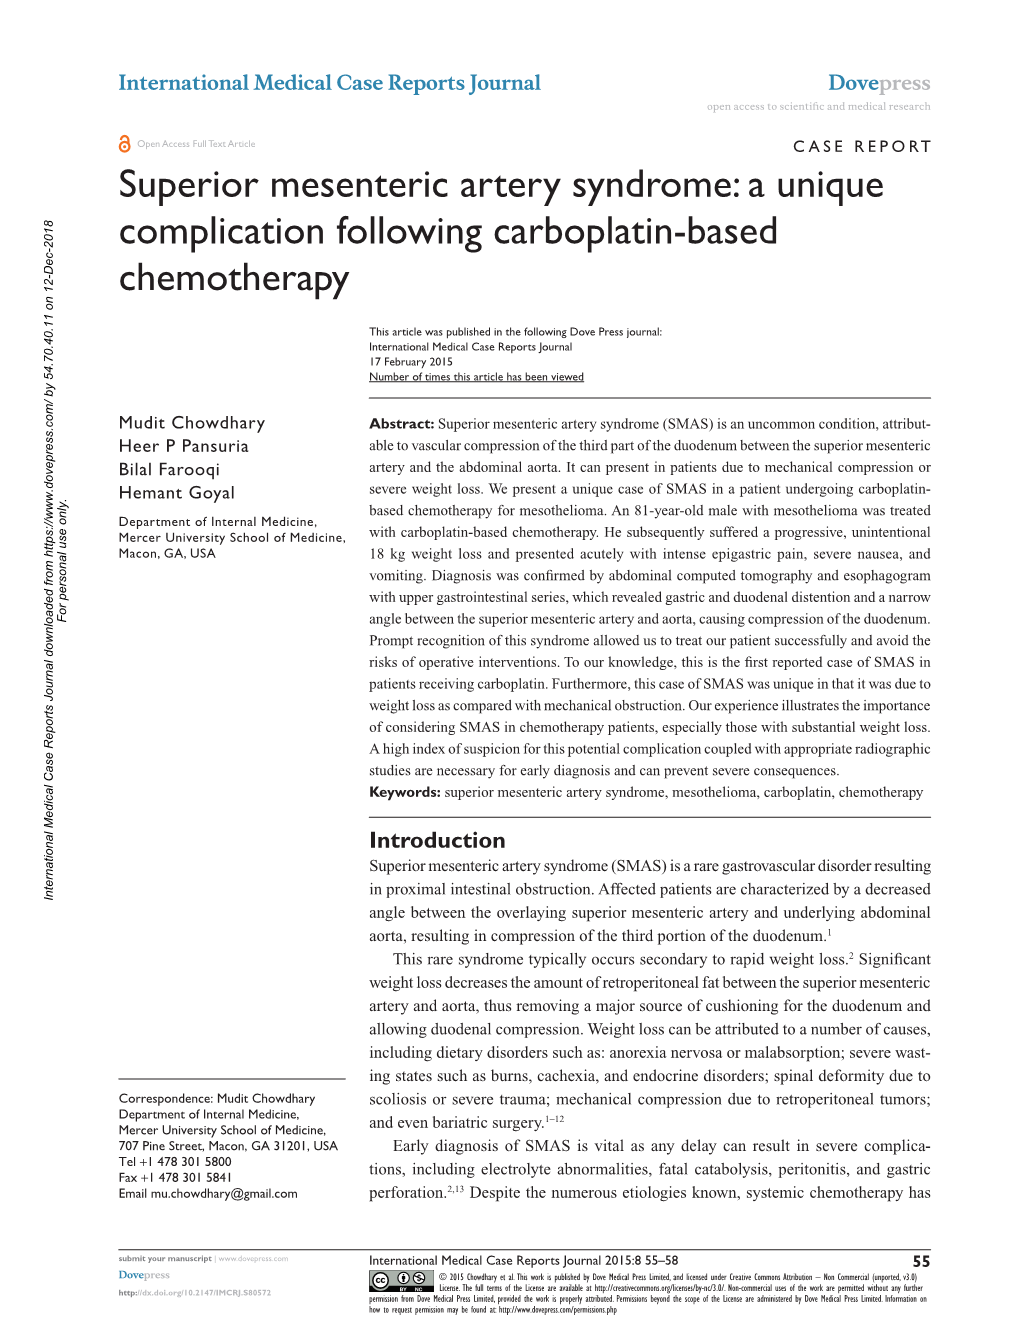 Superior Mesenteric Artery Syndrome: a Unique Complication Following Carboplatin-Based Chemotherapy